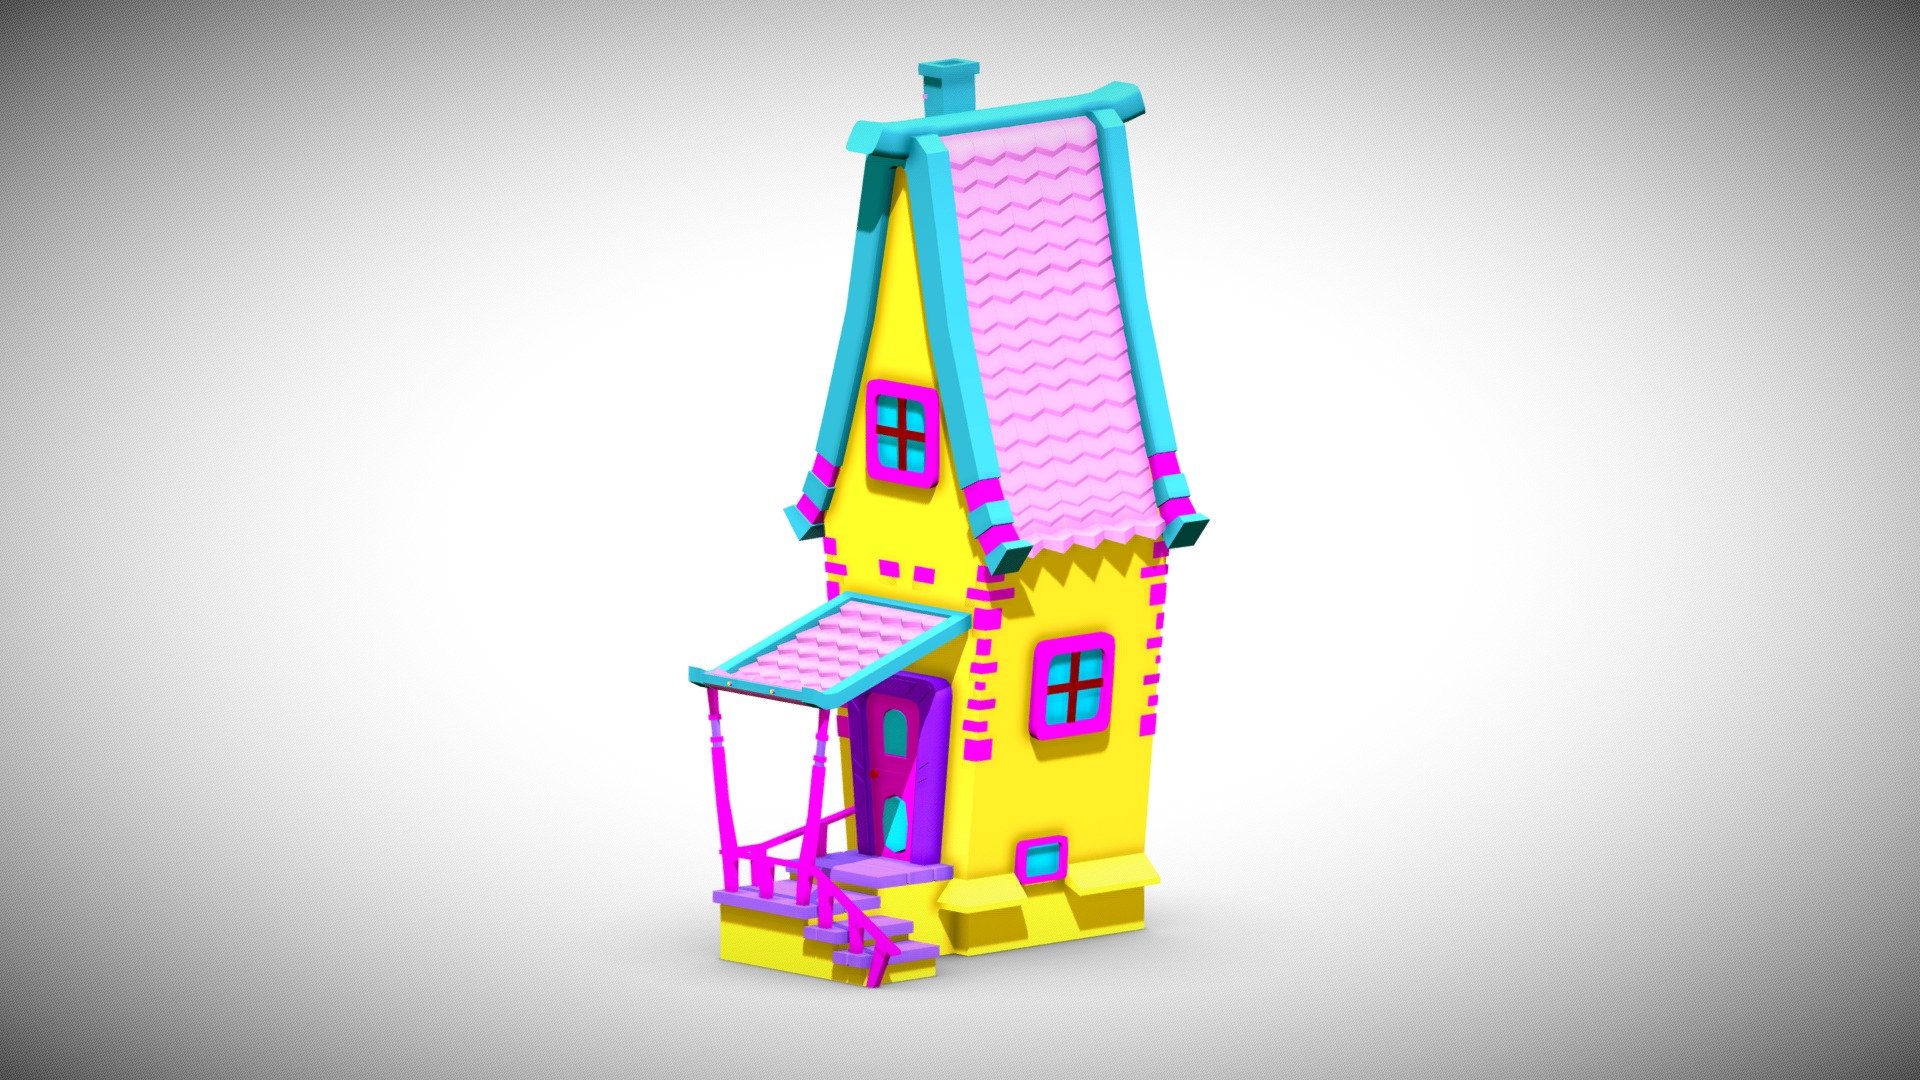 Cartoon Stylished house with 4000 polygons
this house has no uvs and no textures just plain materials with flat colors - Cartoon Style House Lowpoly - Buy Royalty Free 3D model by rfarencibia 3d model